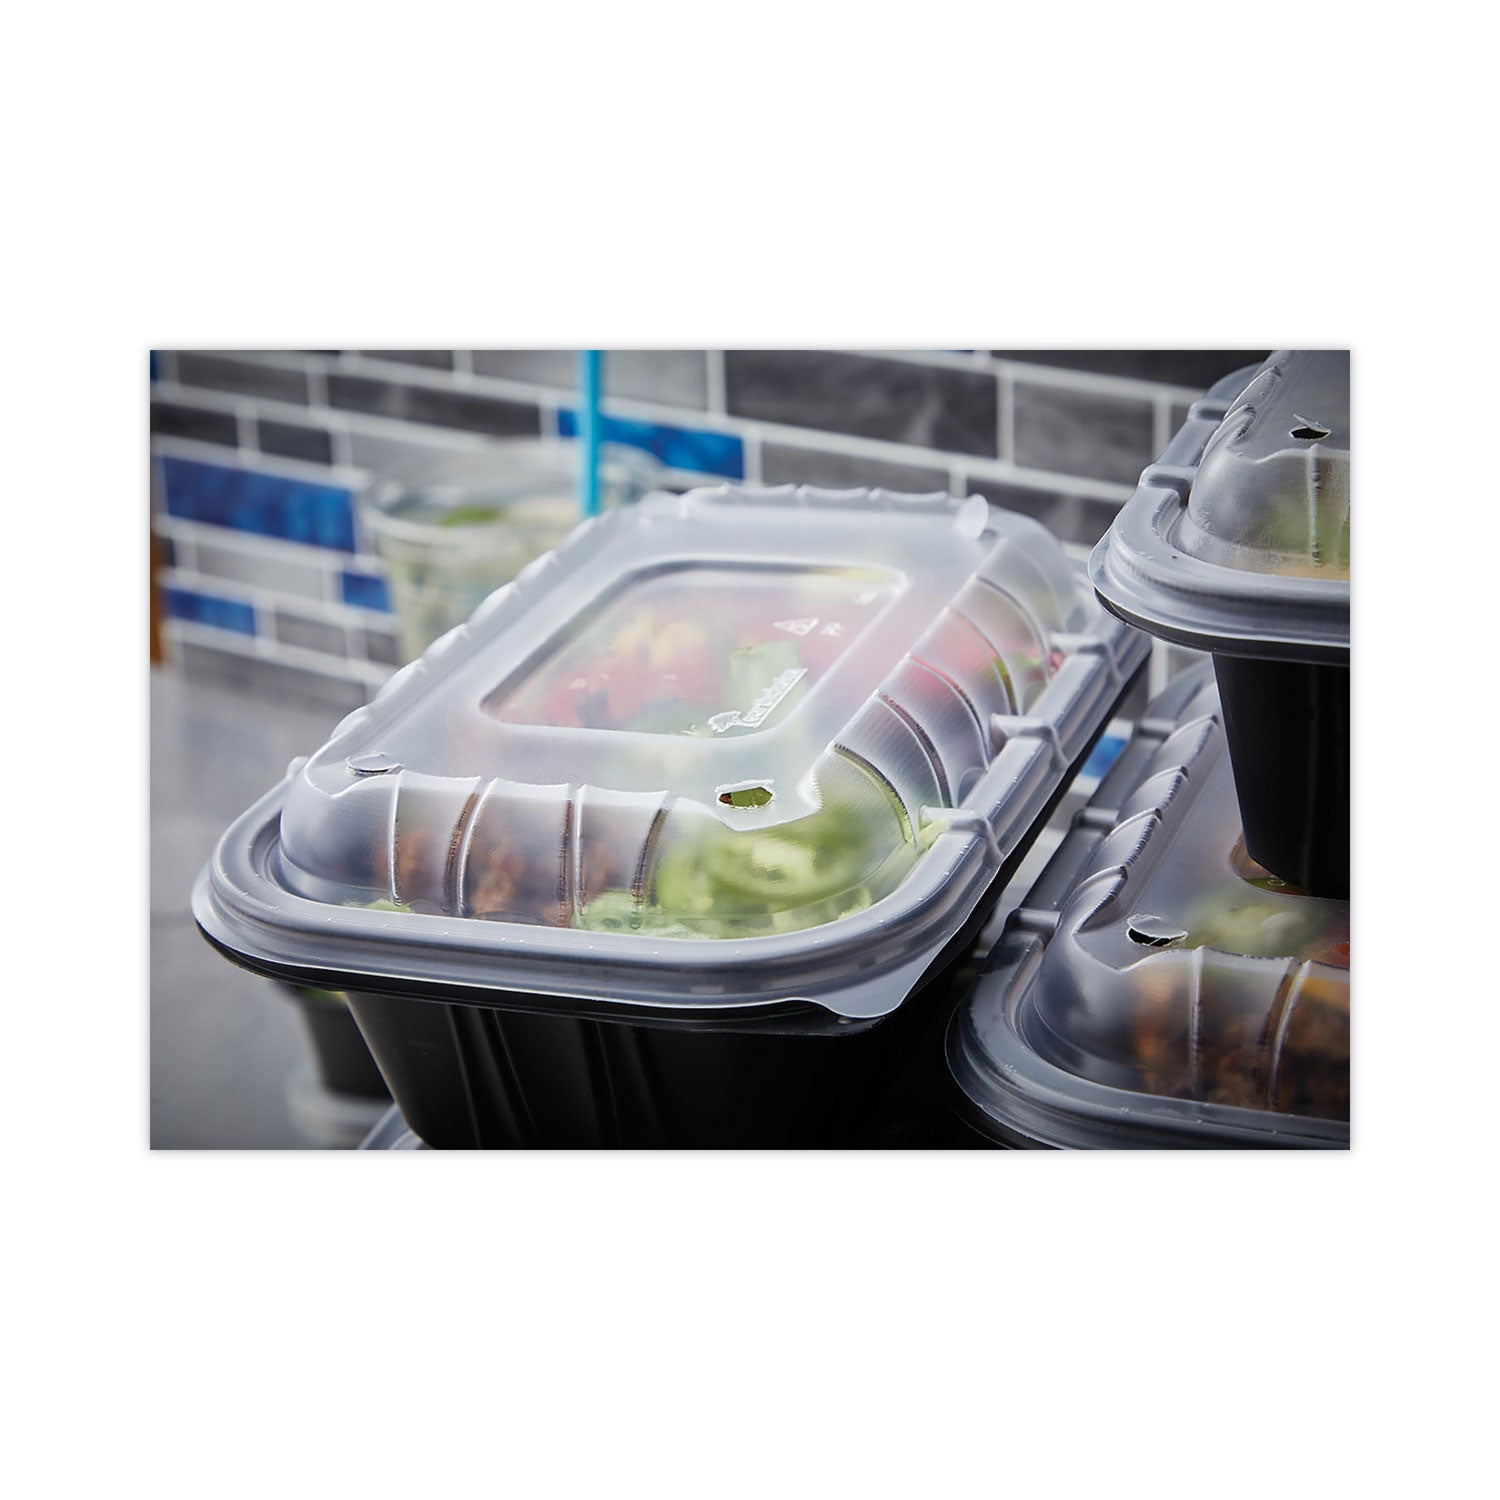 earthchoice-entree2go-takeout-container-64-oz-1175-x-875-x-213-black-plastic-200-carton_pctycnb12x96400 - 4